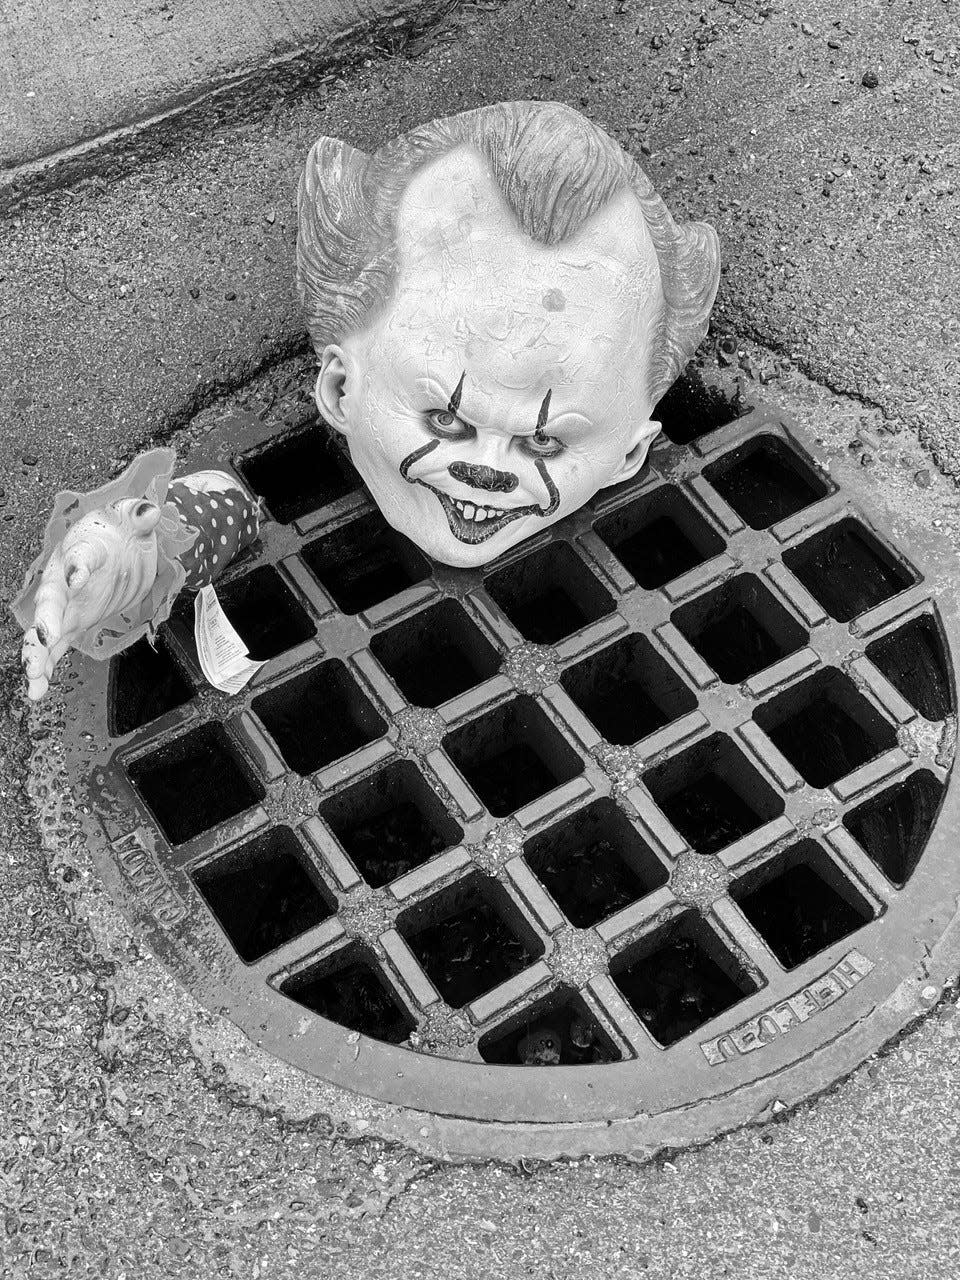 Pennywise the Clown, the central monster in Stephen King's 1986 novel "It," taunts passersby from a sewer grate in Bangor, Maine. Author Sharon Kitchens visited the spot and snapped this picture for her new book, "Stephen King's Maine."